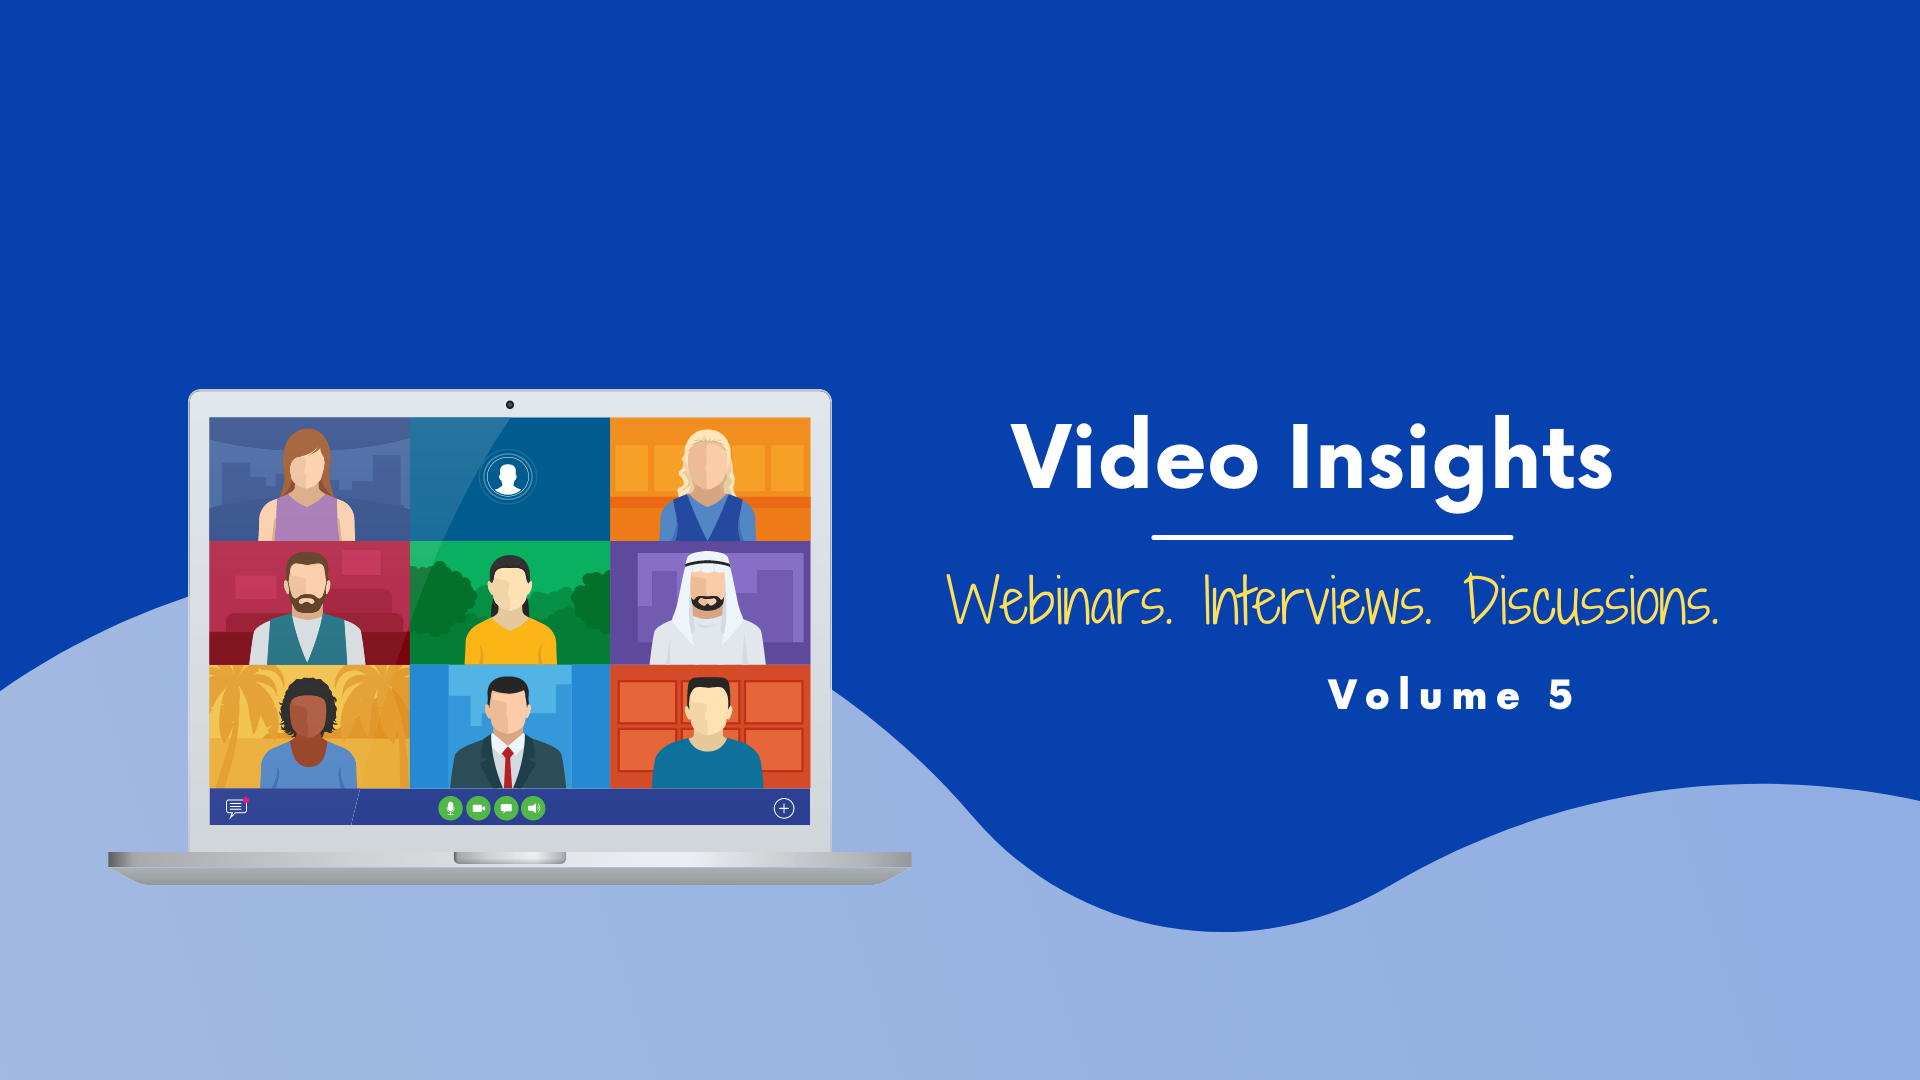 Video Insights: Webinars & Discussions (Volume 5)